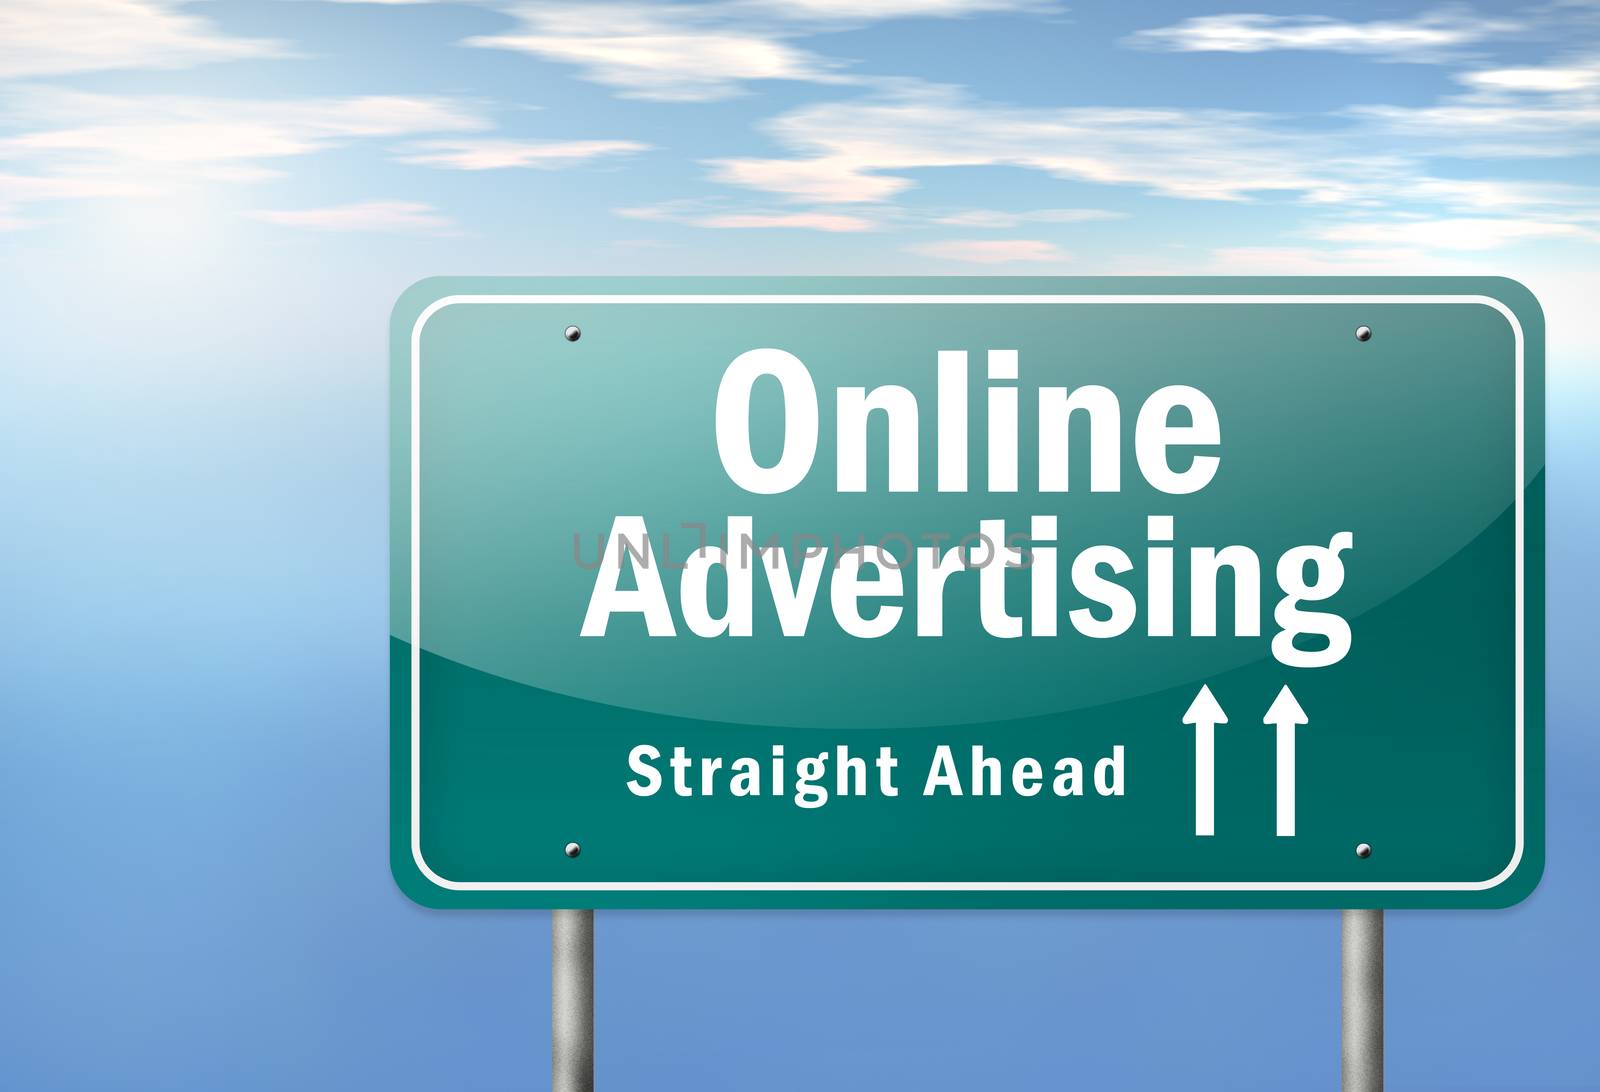 Highway Signpost with Online Advertising wording